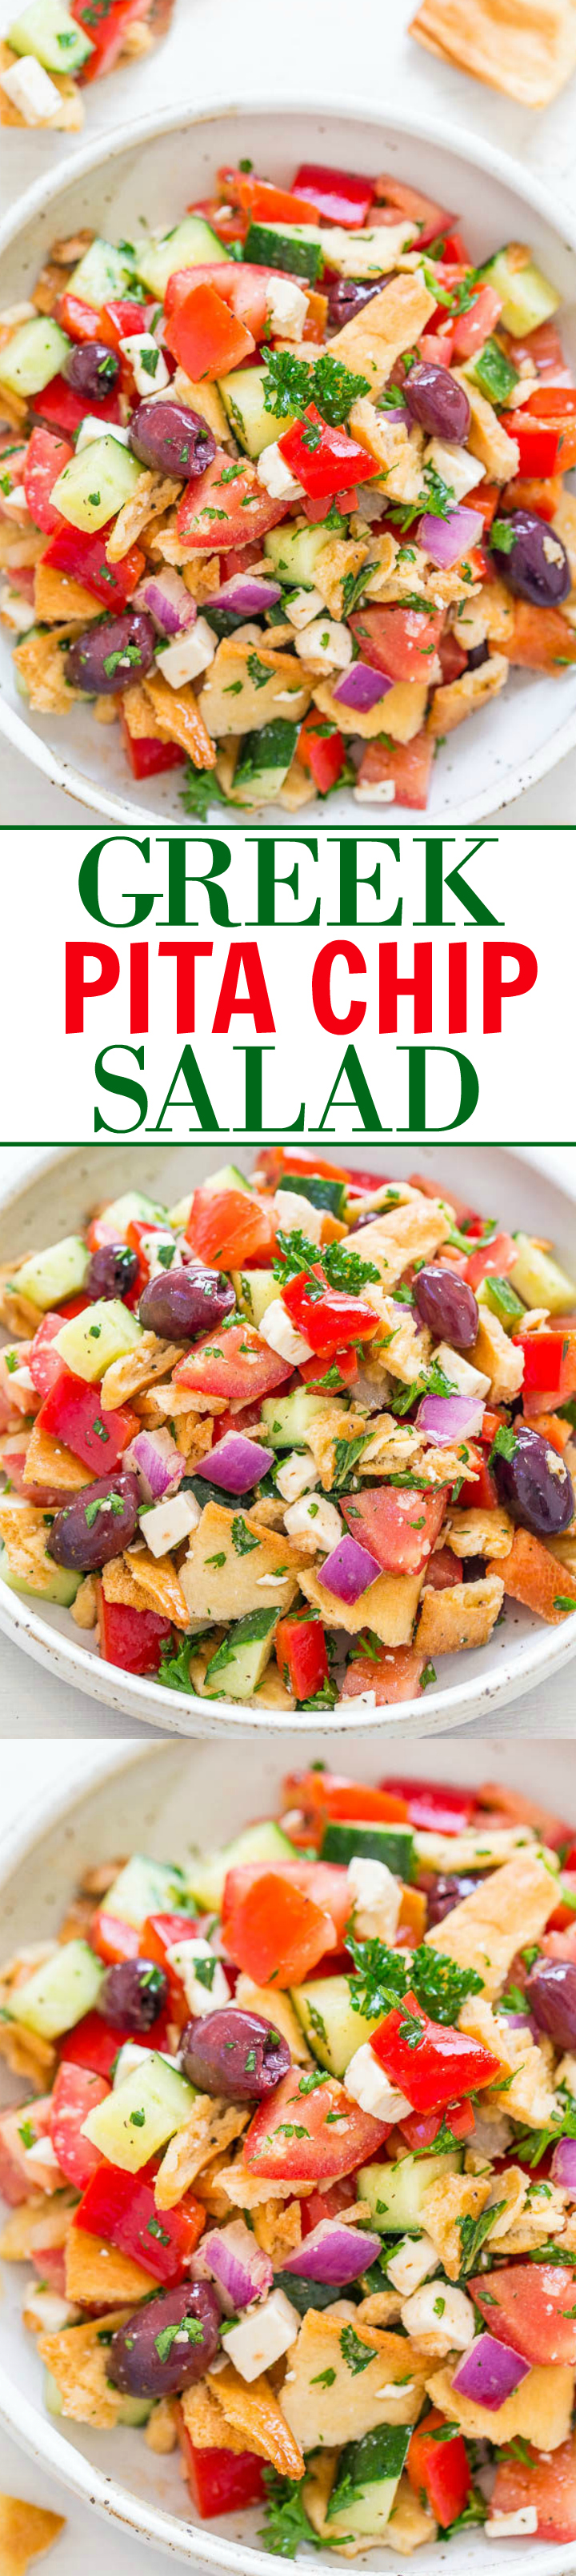 Two picture collage of greek pita chip salad with graphic title